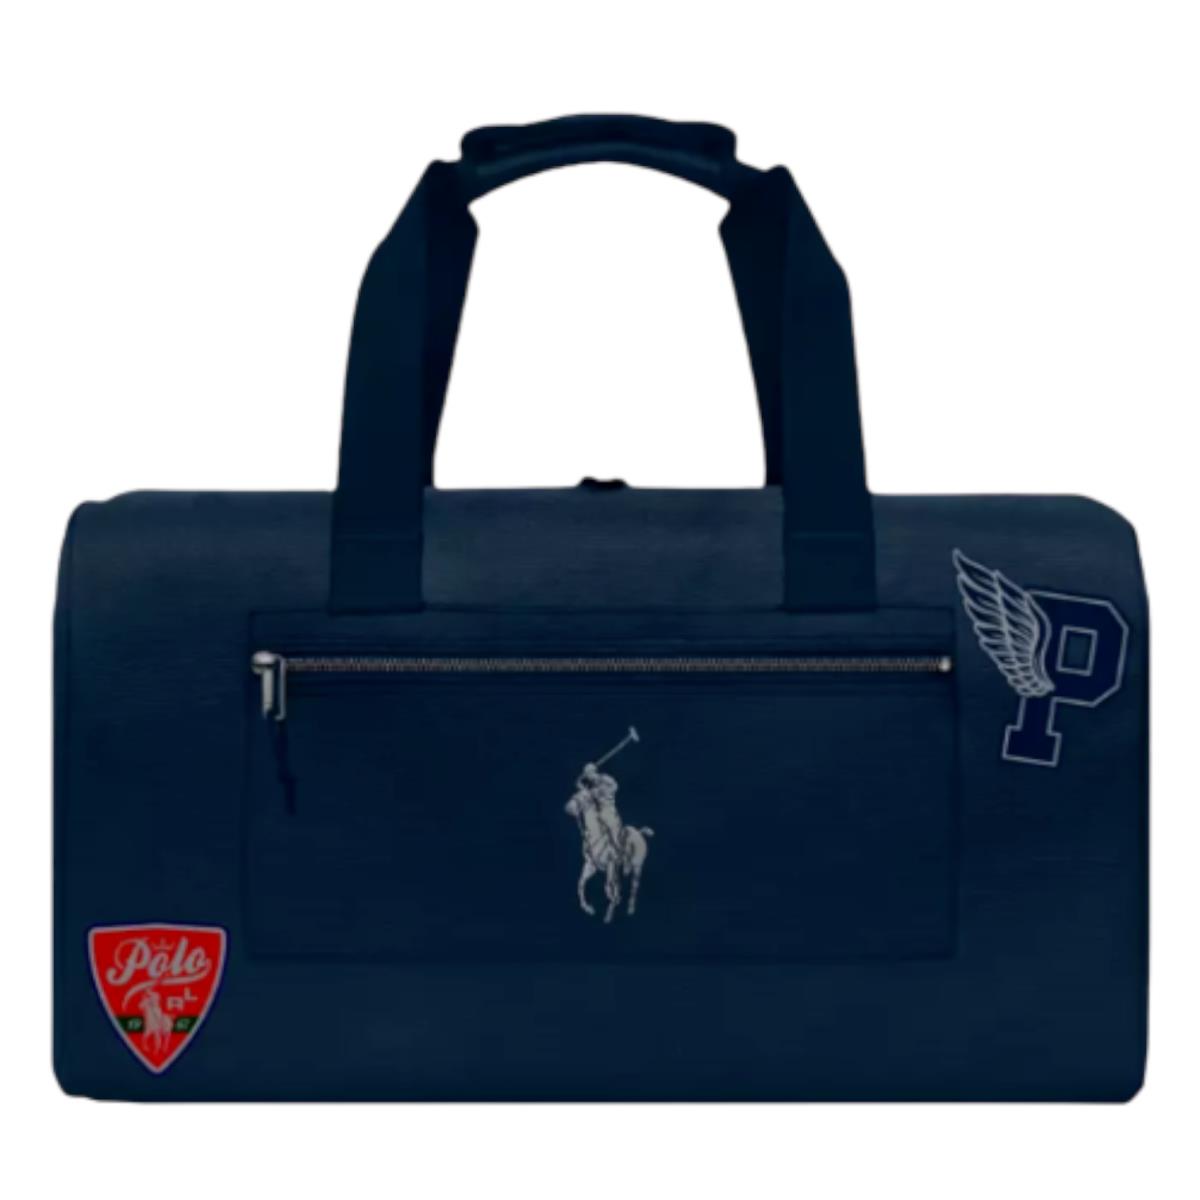 Polo Ralph Lauren Weekender Gym Carry On Duffle Bag 3 Straps Navy - Blue